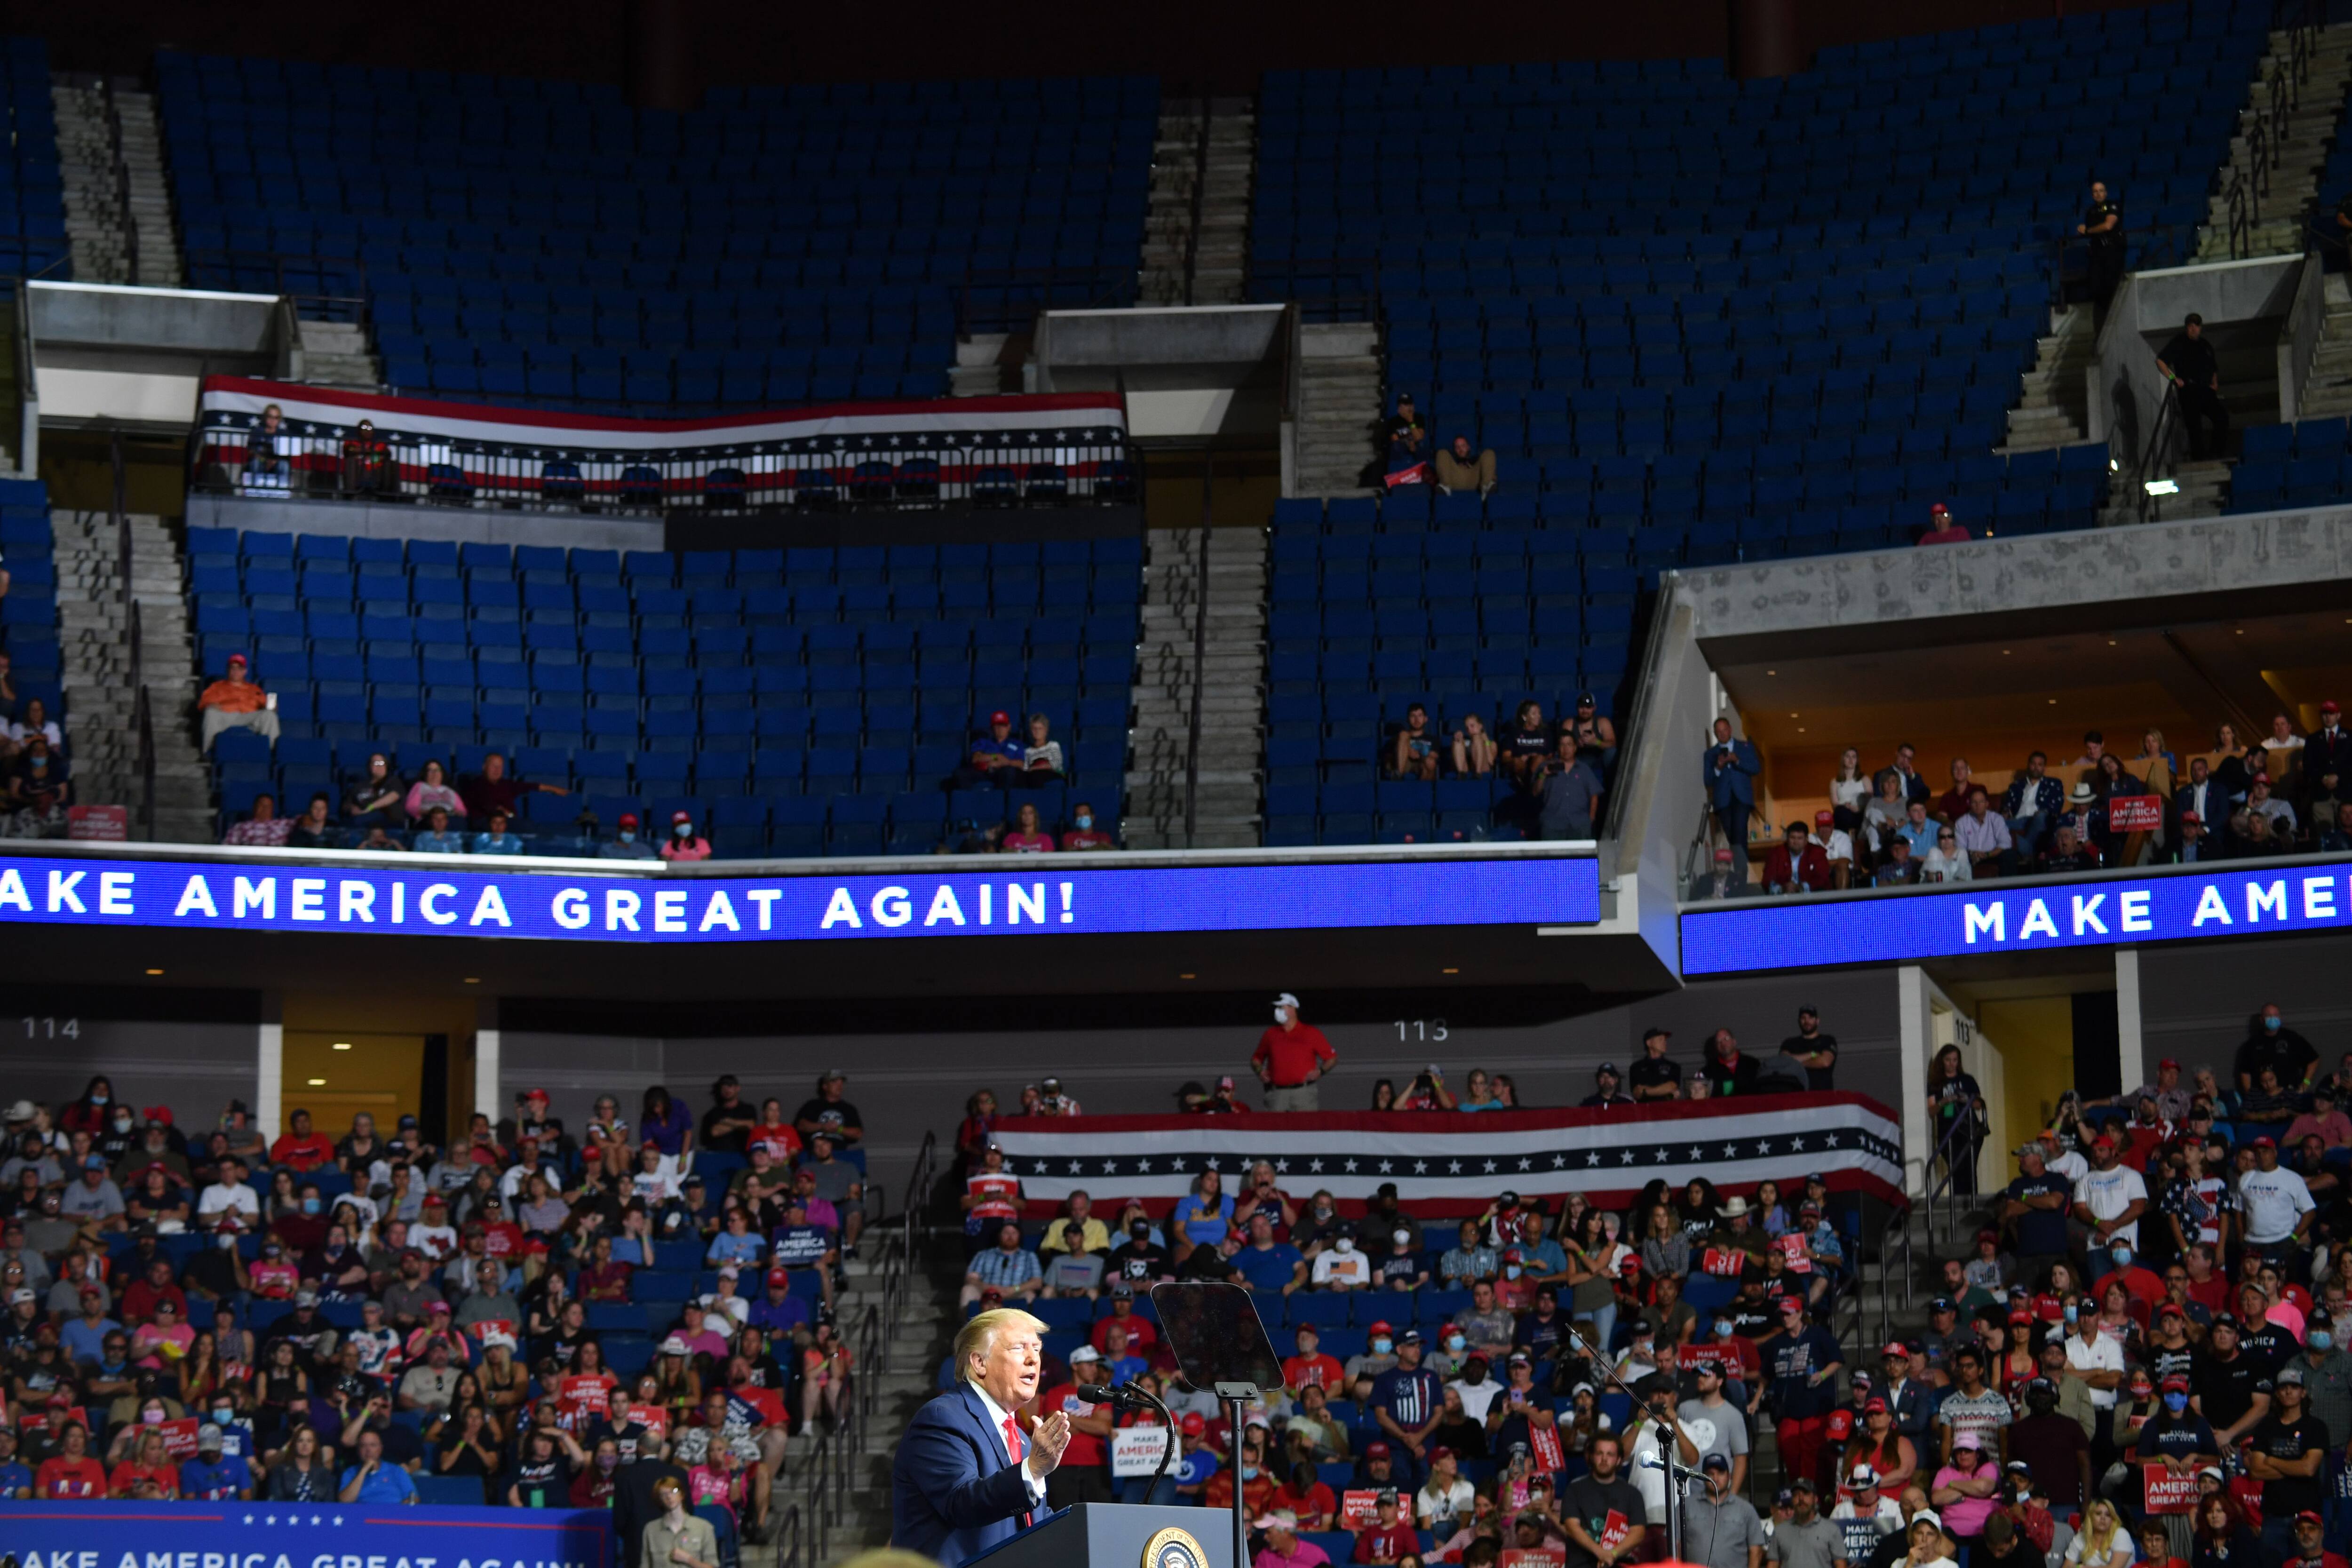 The upper section of the arena is seen partially empty as US President Donald Trump speaks during a campaign rally at the BOK Center on June 20, 2020 in Tulsa, Oklahoma. - Hundreds of supporters lined up early for Donald Trump's first political rally in months, saying the risk of contracting COVID-19 in a big, packed arena would not keep them from hearing the president's campaign message. (Photo by Nicholas Kamm / AFP) (Photo by NICHOLAS KAMM/AFP via Getty Images)